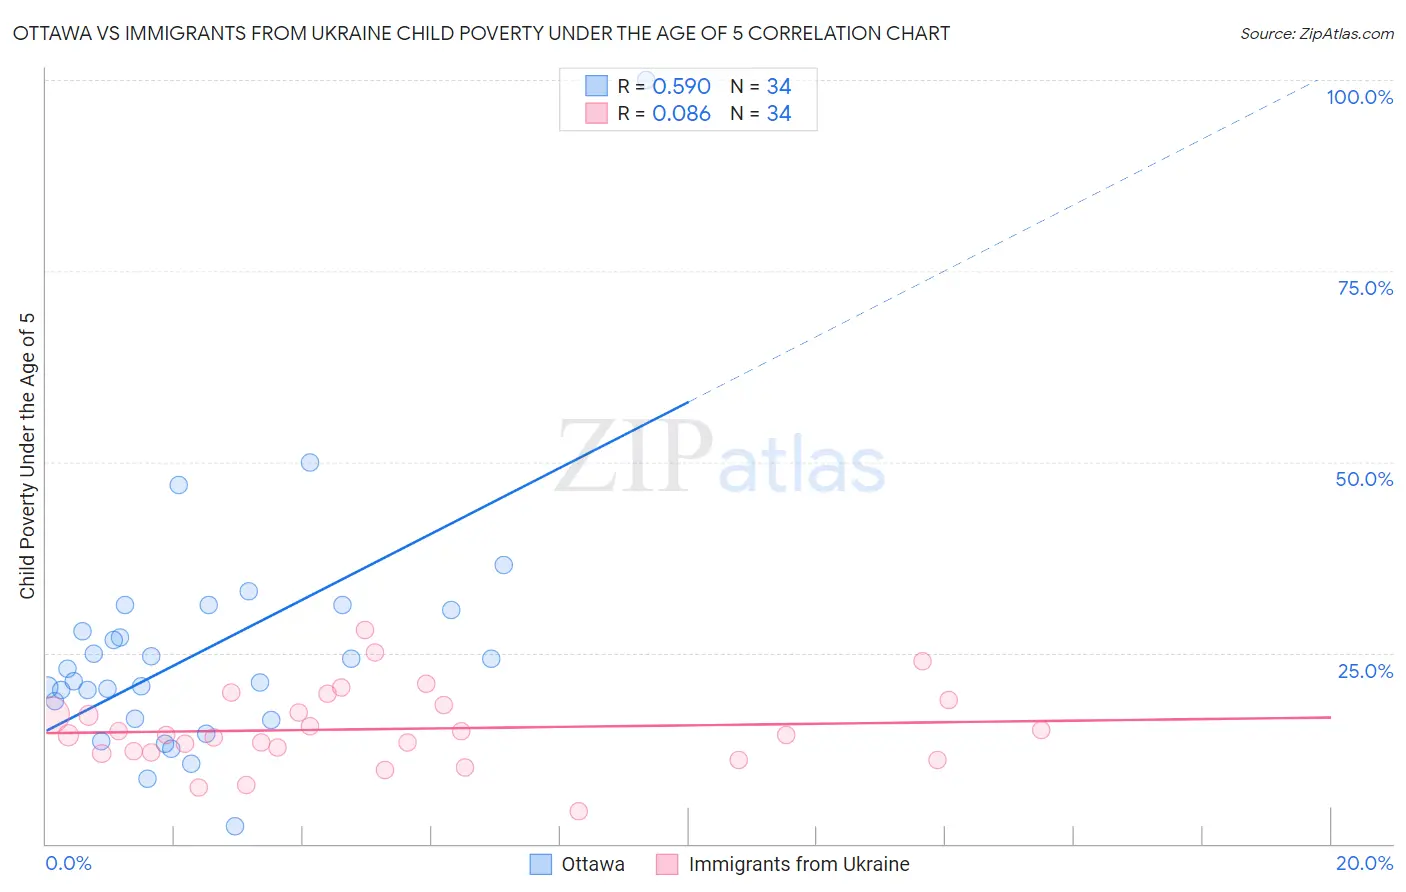 Ottawa vs Immigrants from Ukraine Child Poverty Under the Age of 5